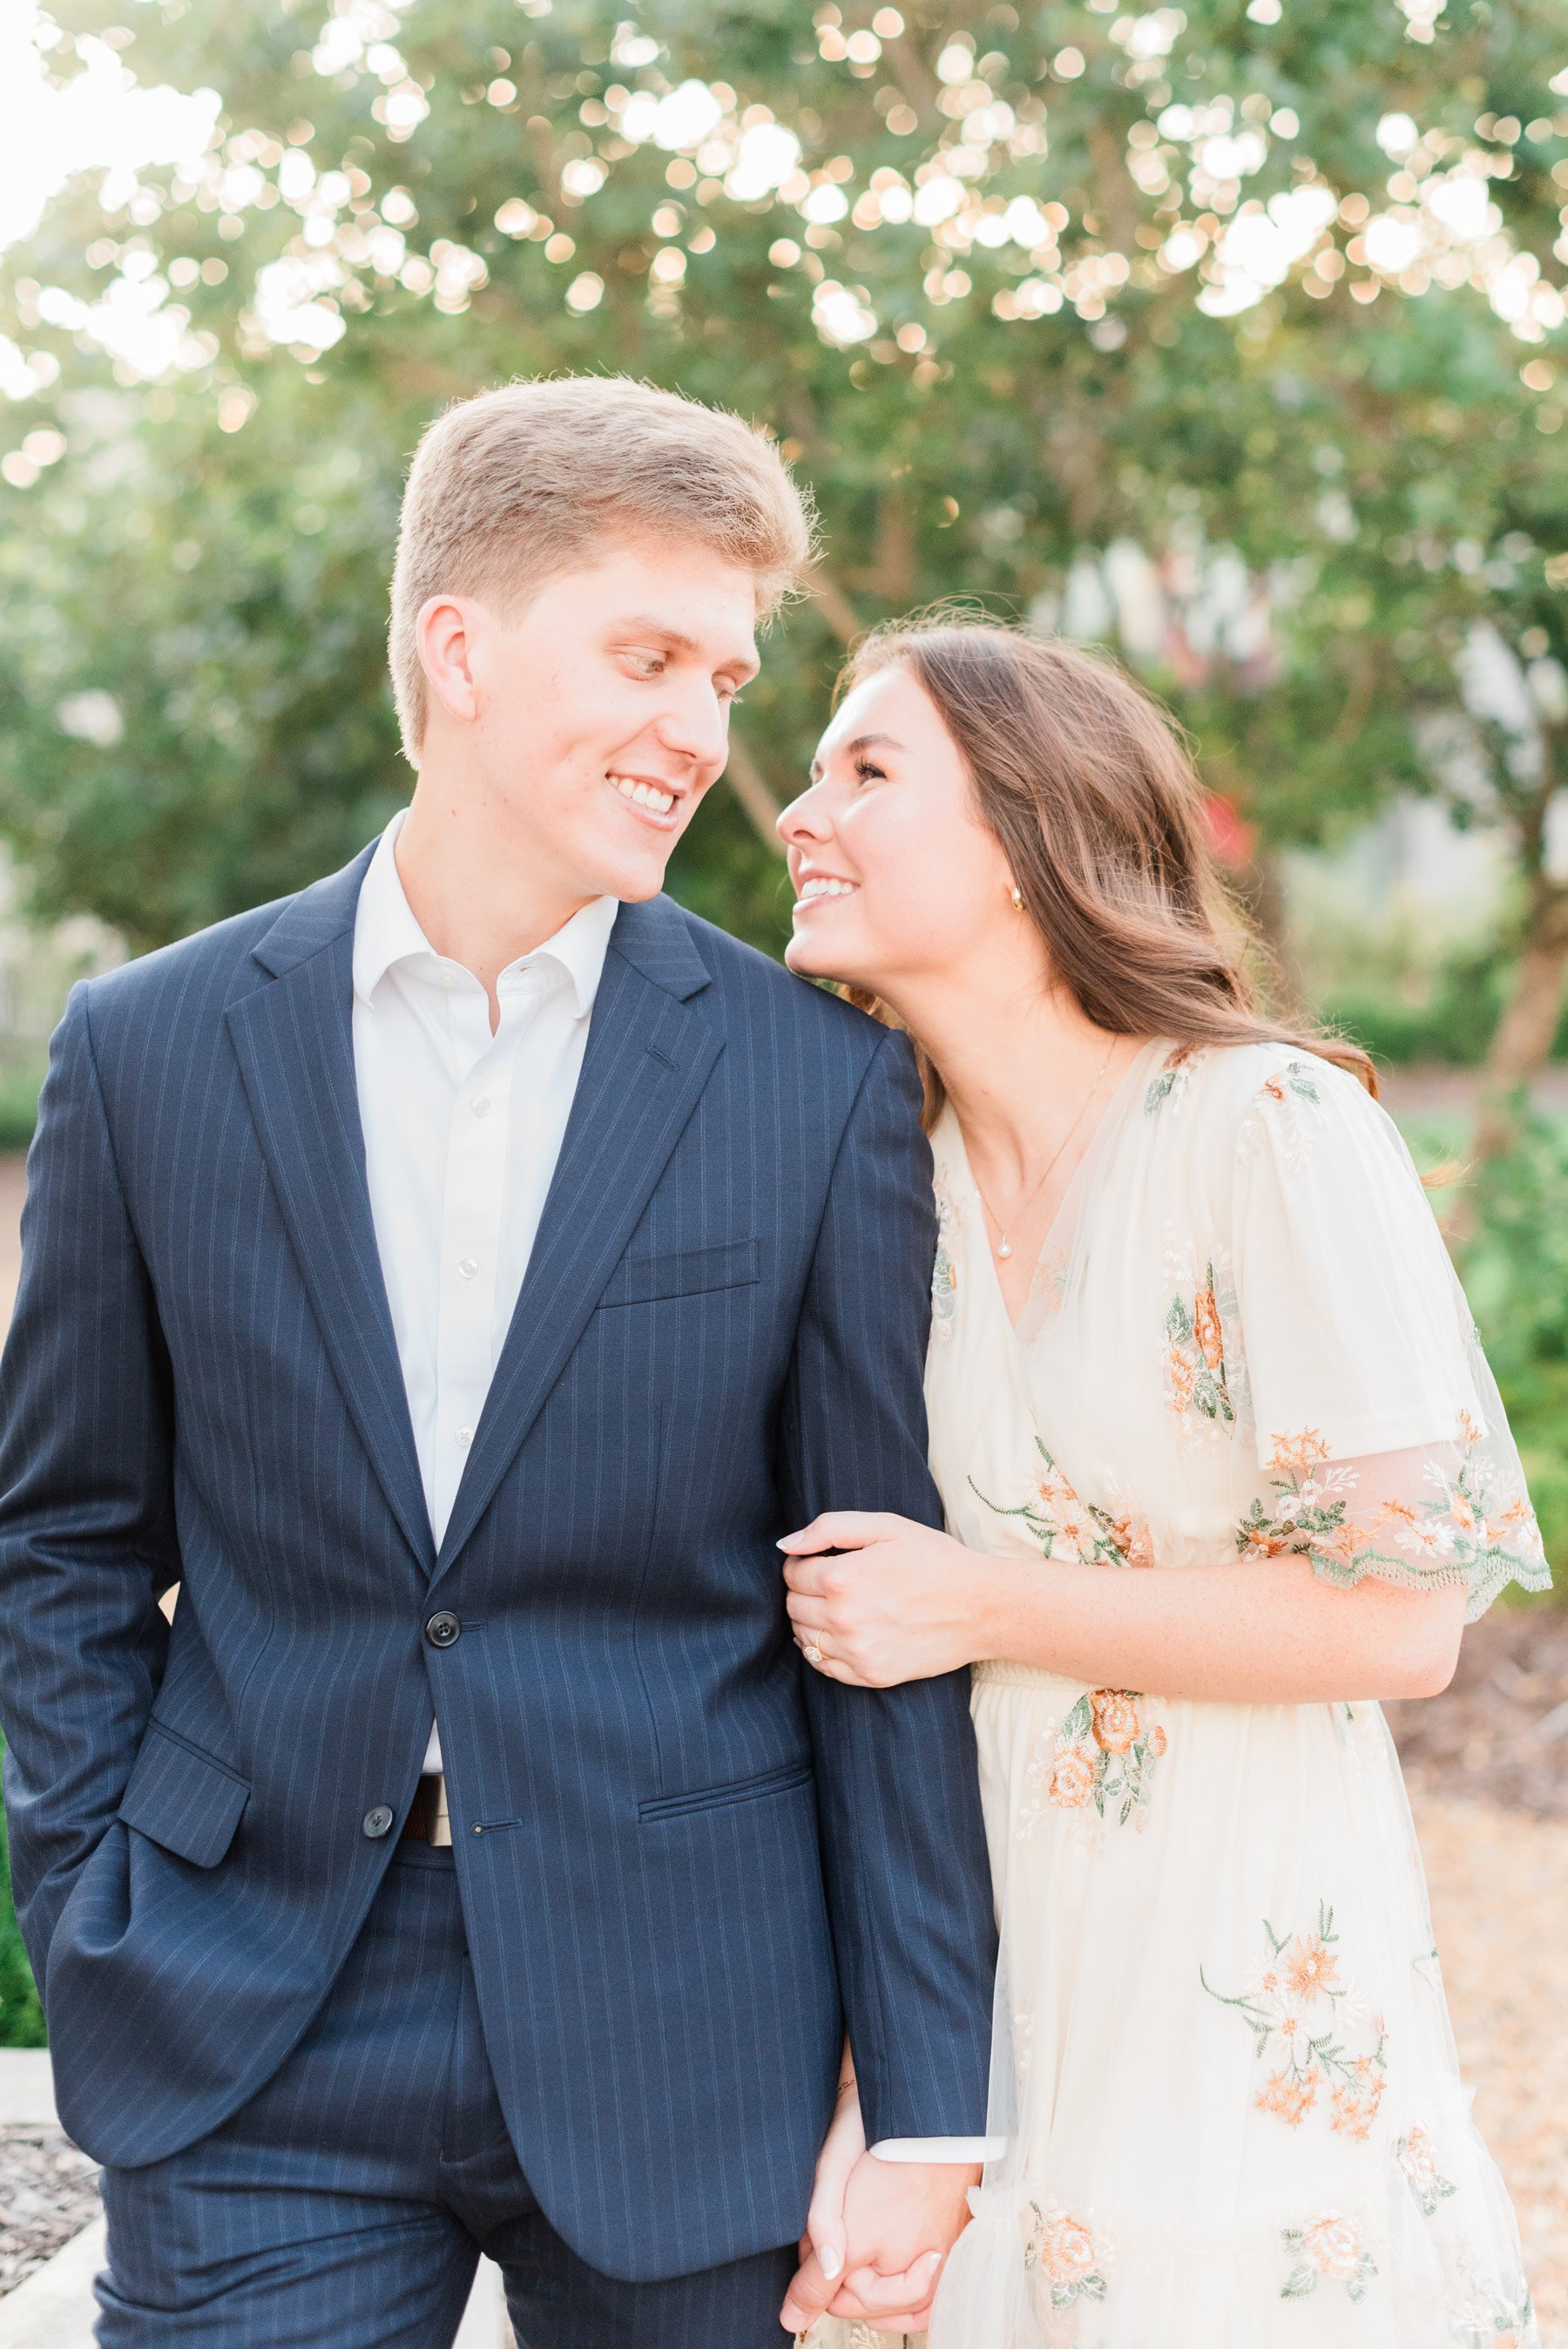    This couple was so in love, it was an honor to capture their relationship before the big day. #trilithstudios #georgiaweddingphotographer #fayettevillephotographer #fayettevilleengagementphotos #outdoorengagements #formalengagementphotos #reasonst